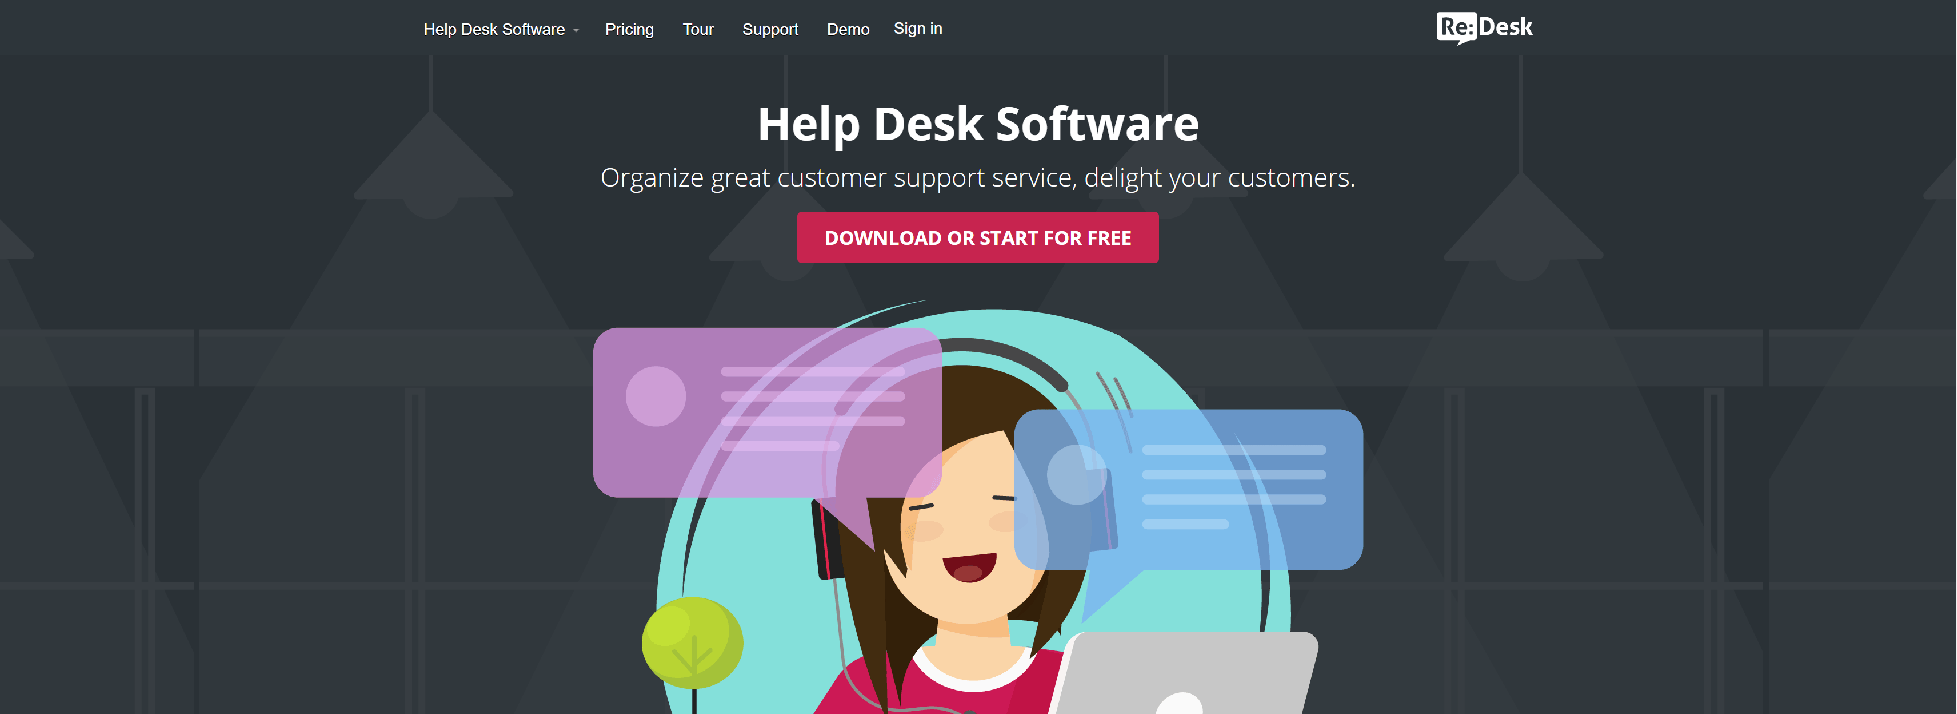 Top 11 Best Help Desk Software Solutions For Small Business 2020